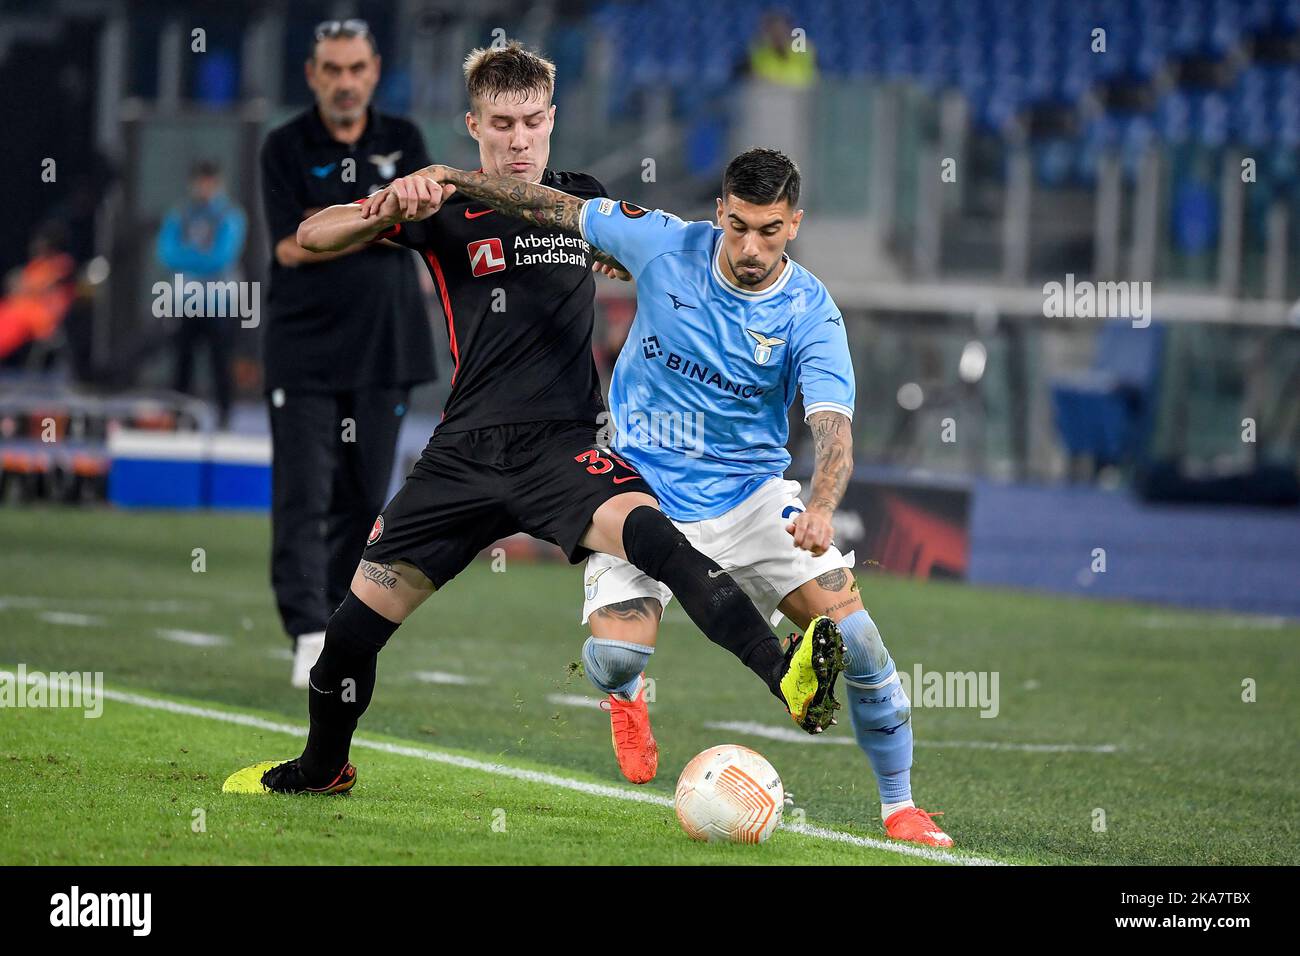 Roma, Italy. 27th Oct, 2022. Charles Rigon Matos of Midtjylland and Mattia Zaccagni of SS Lazio compete for the ball during the Europa League Group F football match between SS Lazio and Midtjylland at Olimpico stadium in Roma (Italy), October 27th, 2022. Photo Andrea Staccioli/Insidefoto Credit: Insidefoto di andrea staccioli/Alamy Live News Stock Photo